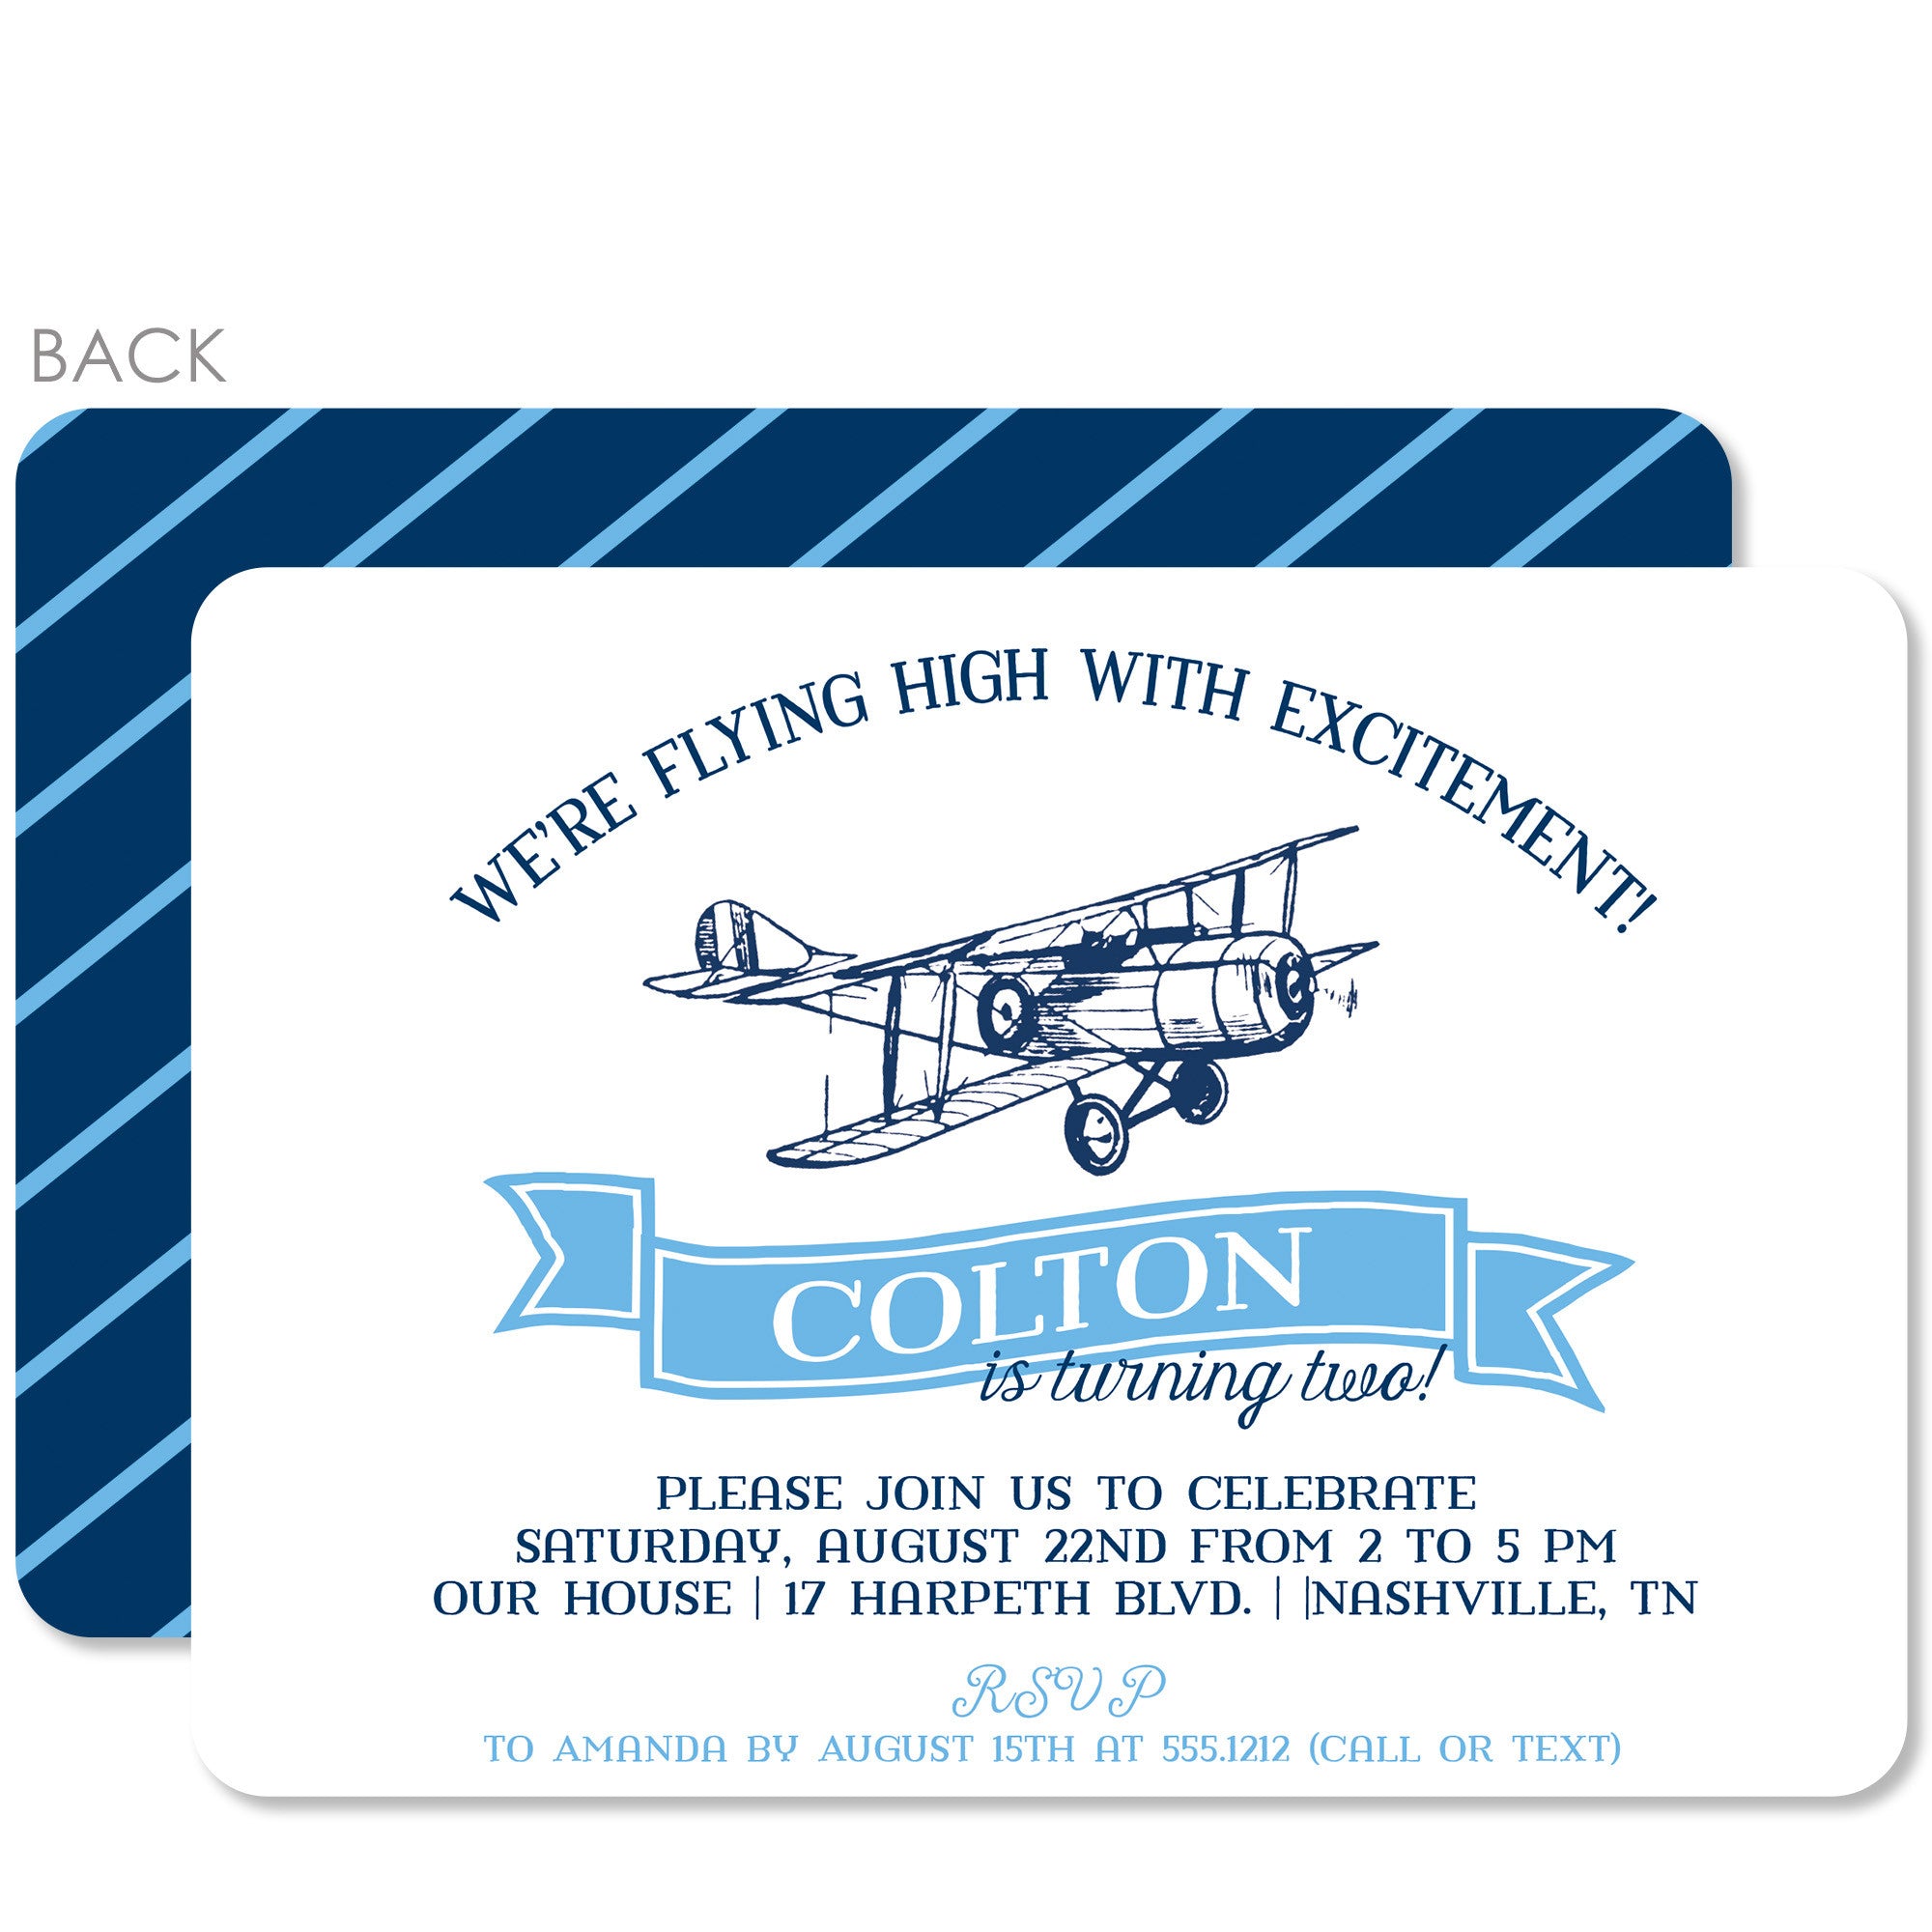 Airplane Birthday Invitation, Illustration from a vingage plane drawing, printed on ultra heay cardstock, Pipsy.com